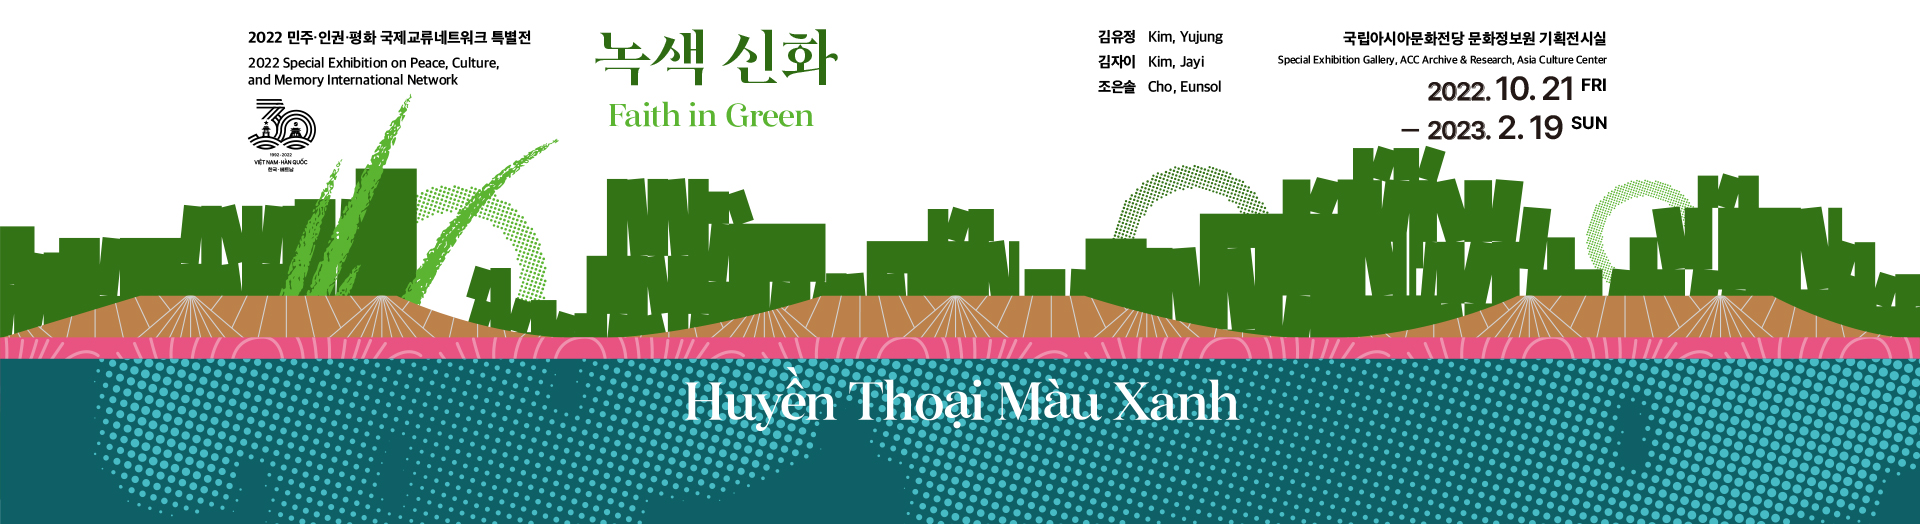 2022 Peace, Culture, Memory Network Special Exhibition of International Exchange “Faith in Green”